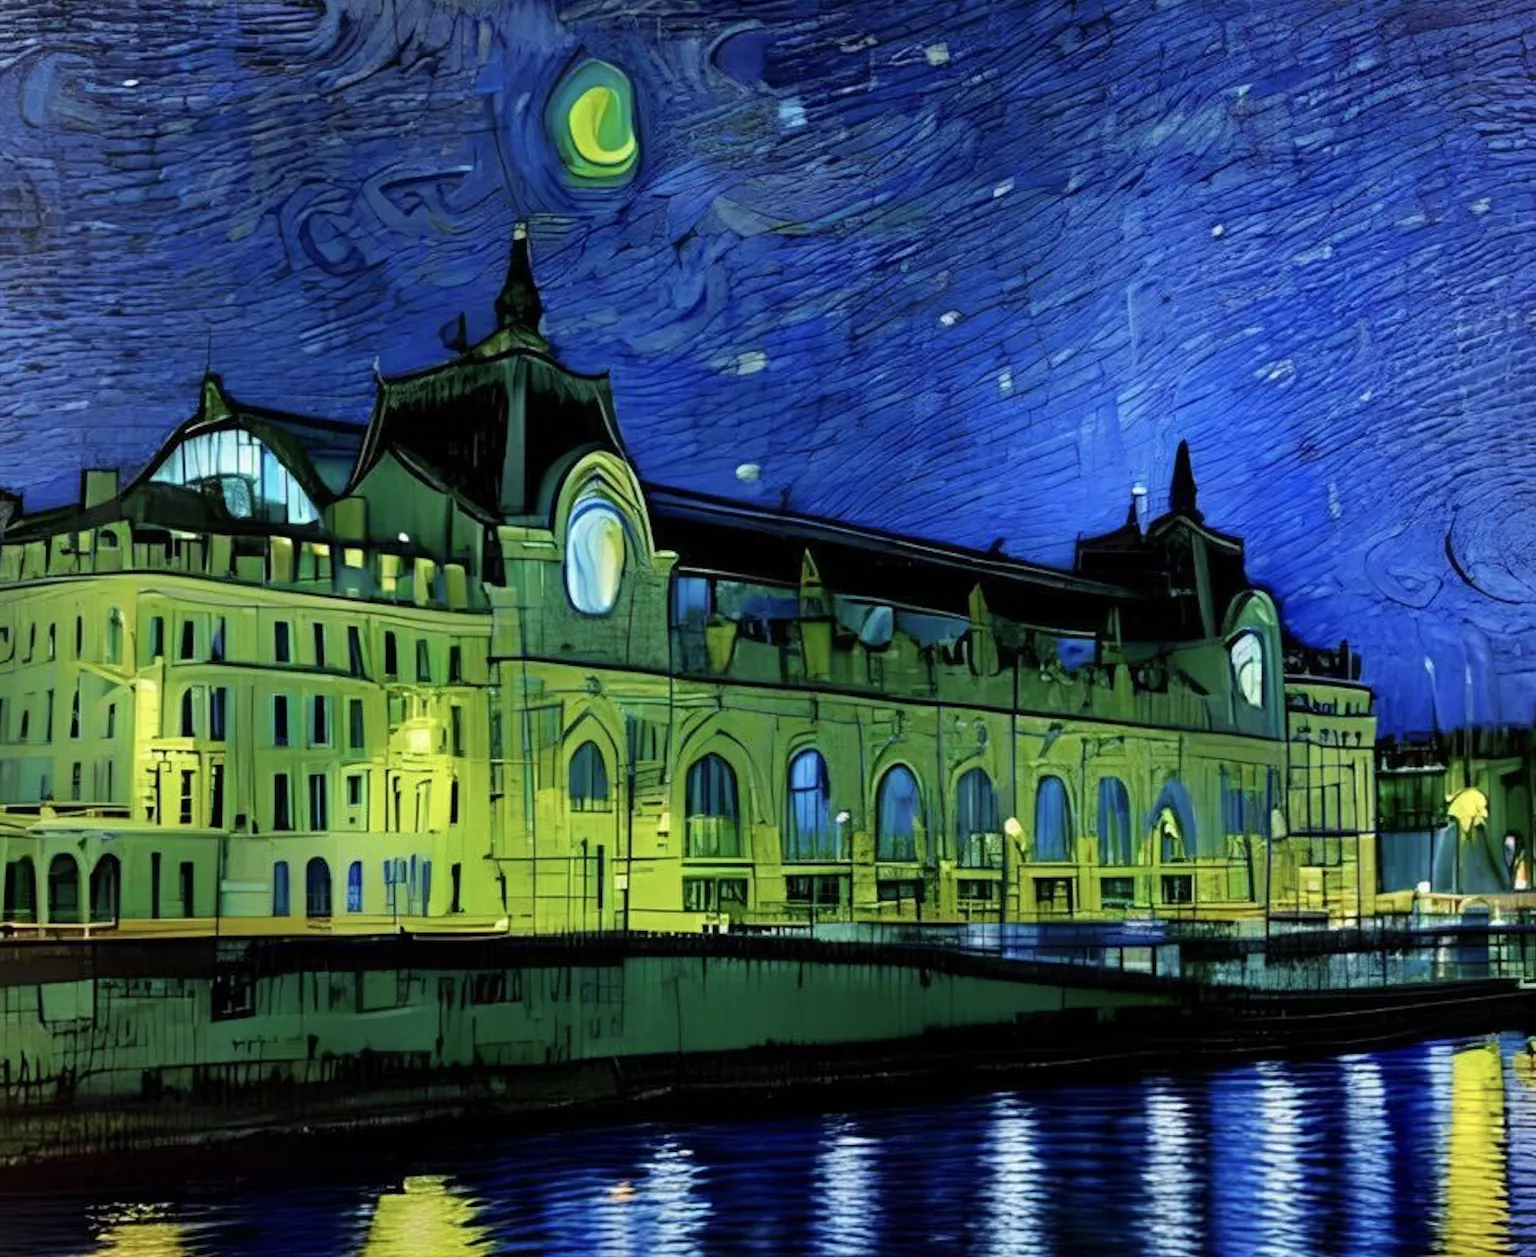 "Musée d’Orsay in a Starry Night," a digital souvenir by KERU created for the Musée d’Orsay (cropped). ©️ Musée d’Orsay and KERU